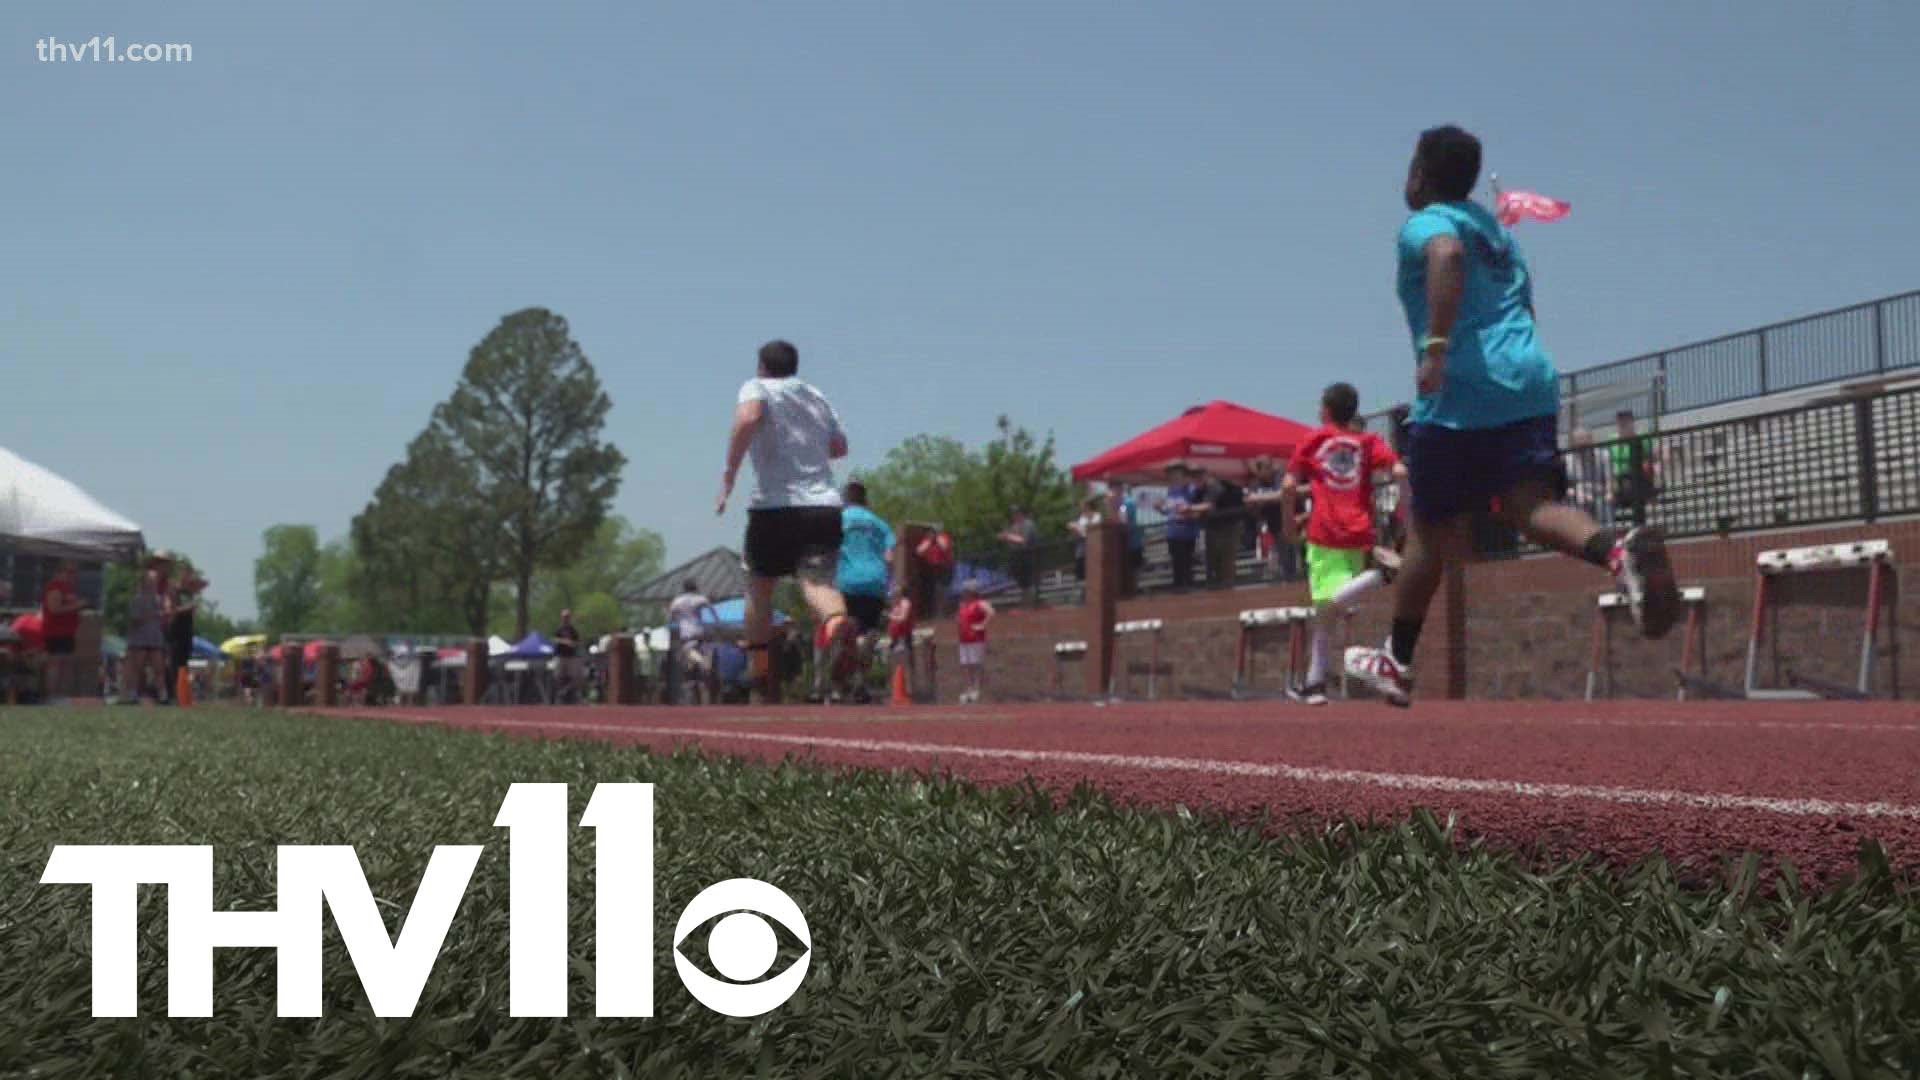 Roughly 1,000 athletes are competing in the Special Olympics in Searcy this week, but organizers are focusing on more than just the competition.